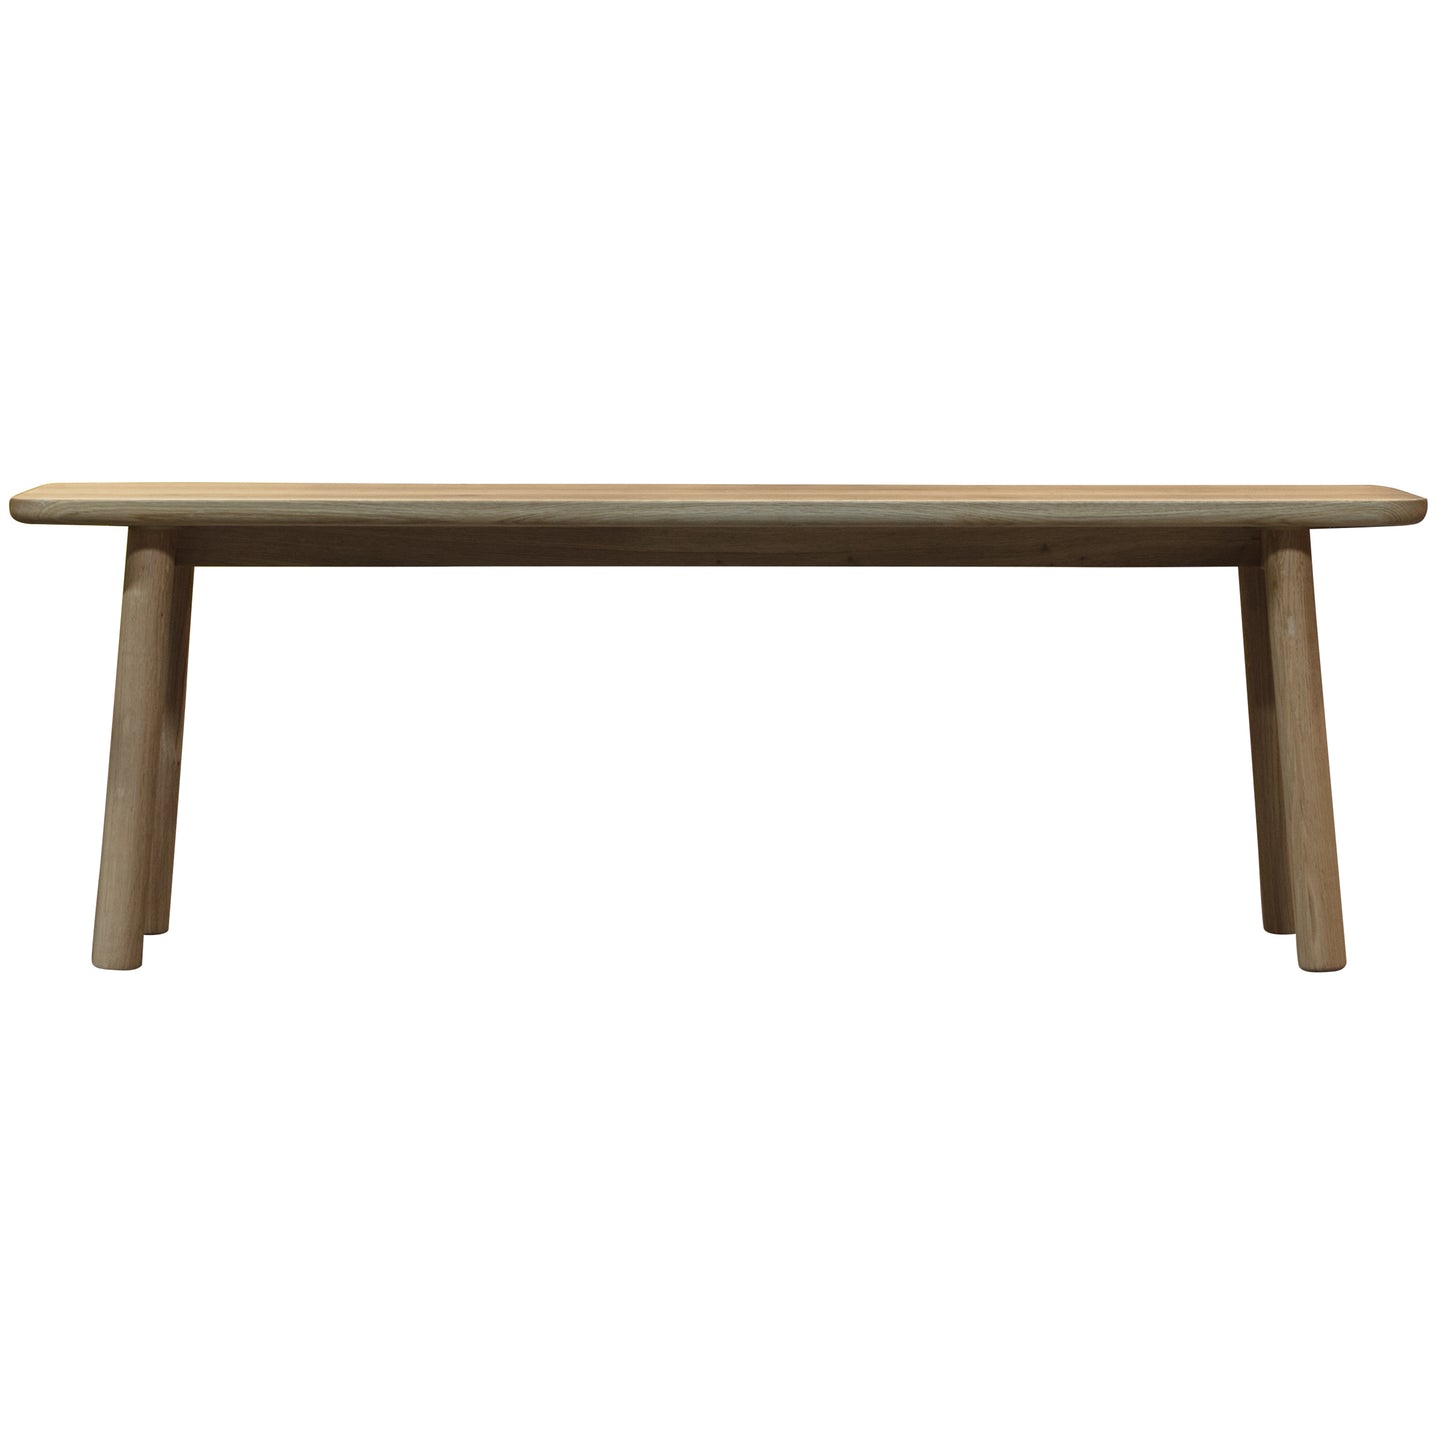 A Wembury Dining Bench 1300x360x430mm by Kikiathome.co.uk for interior decor.